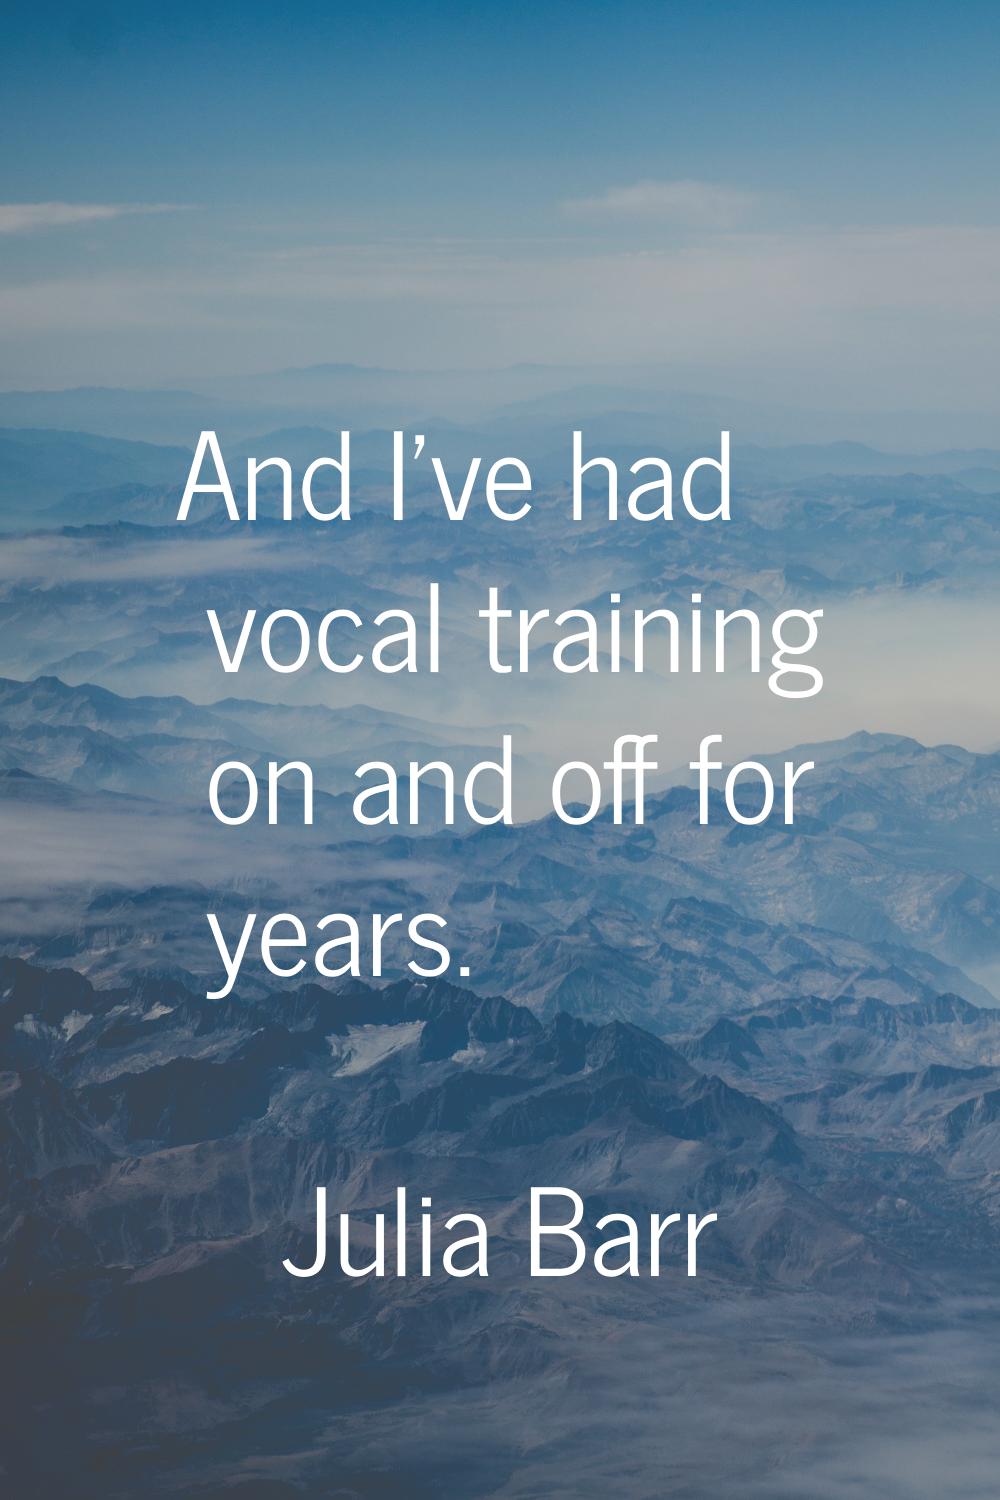 And I've had vocal training on and off for years.